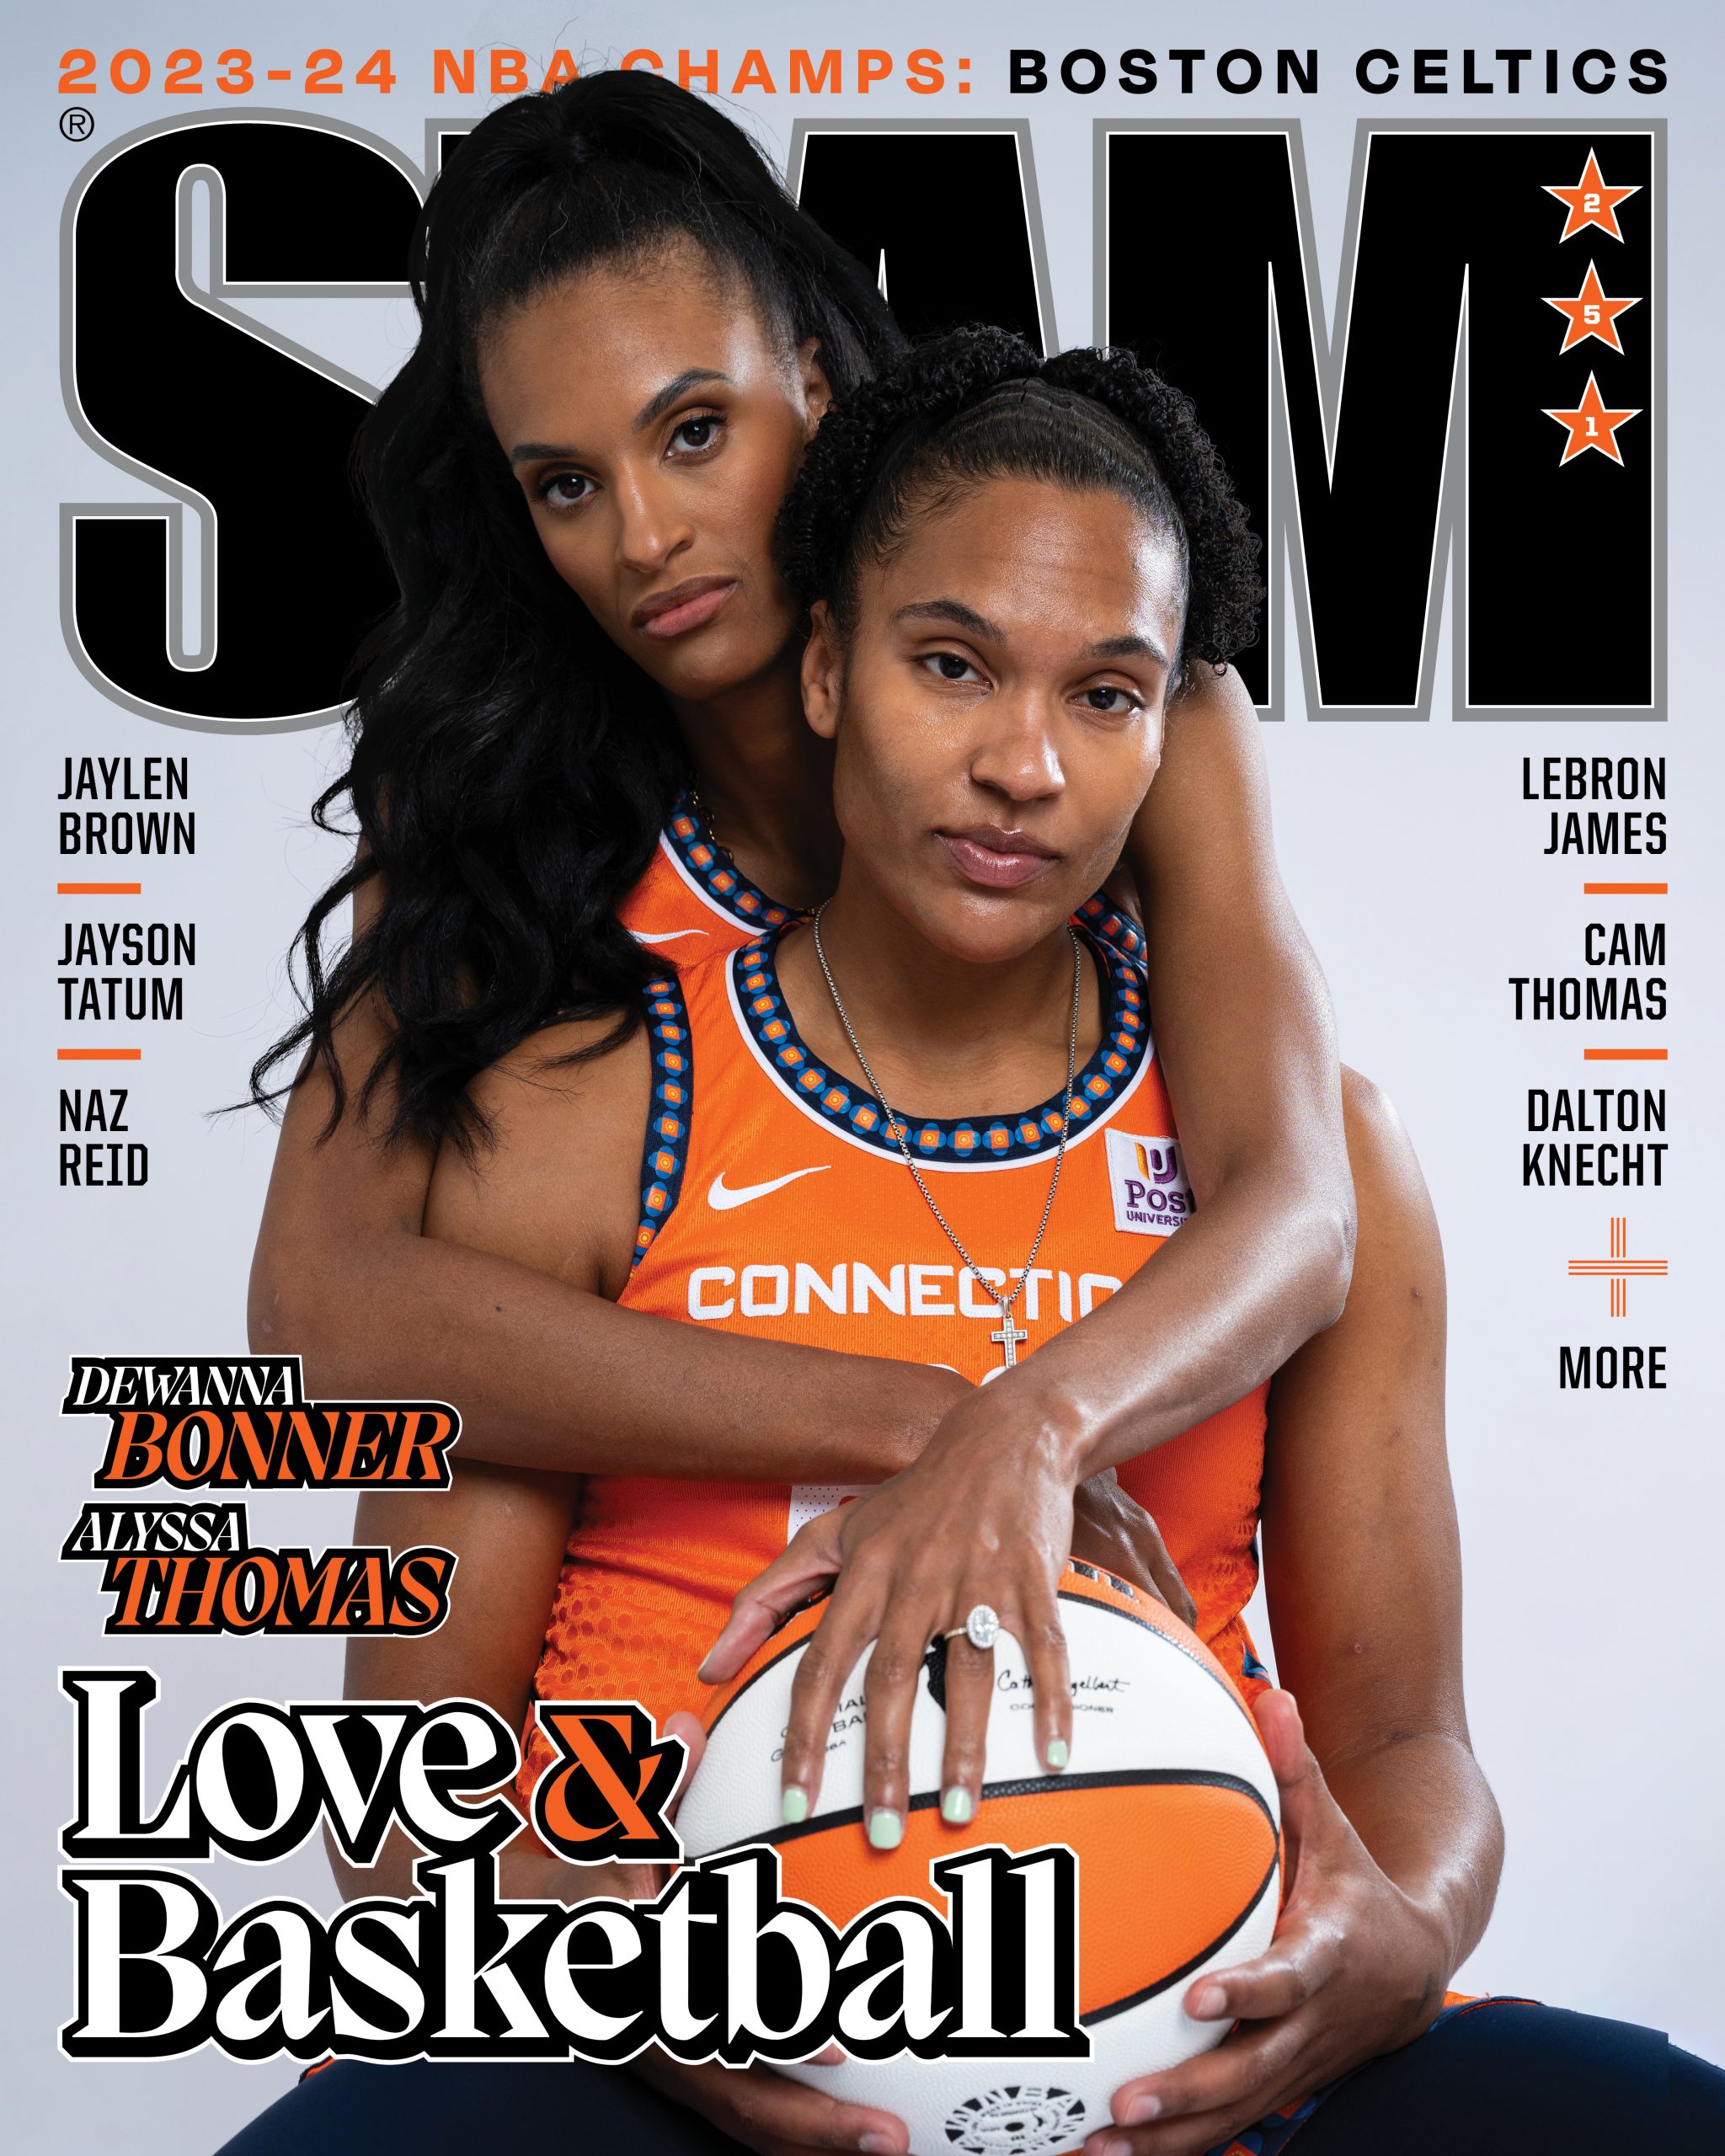 Power Couple: Alyssa Thomas and DeWanna Bonner Talk The Olympics,  Their Engagement and Building A Winning Culture With the Connecticut Sun